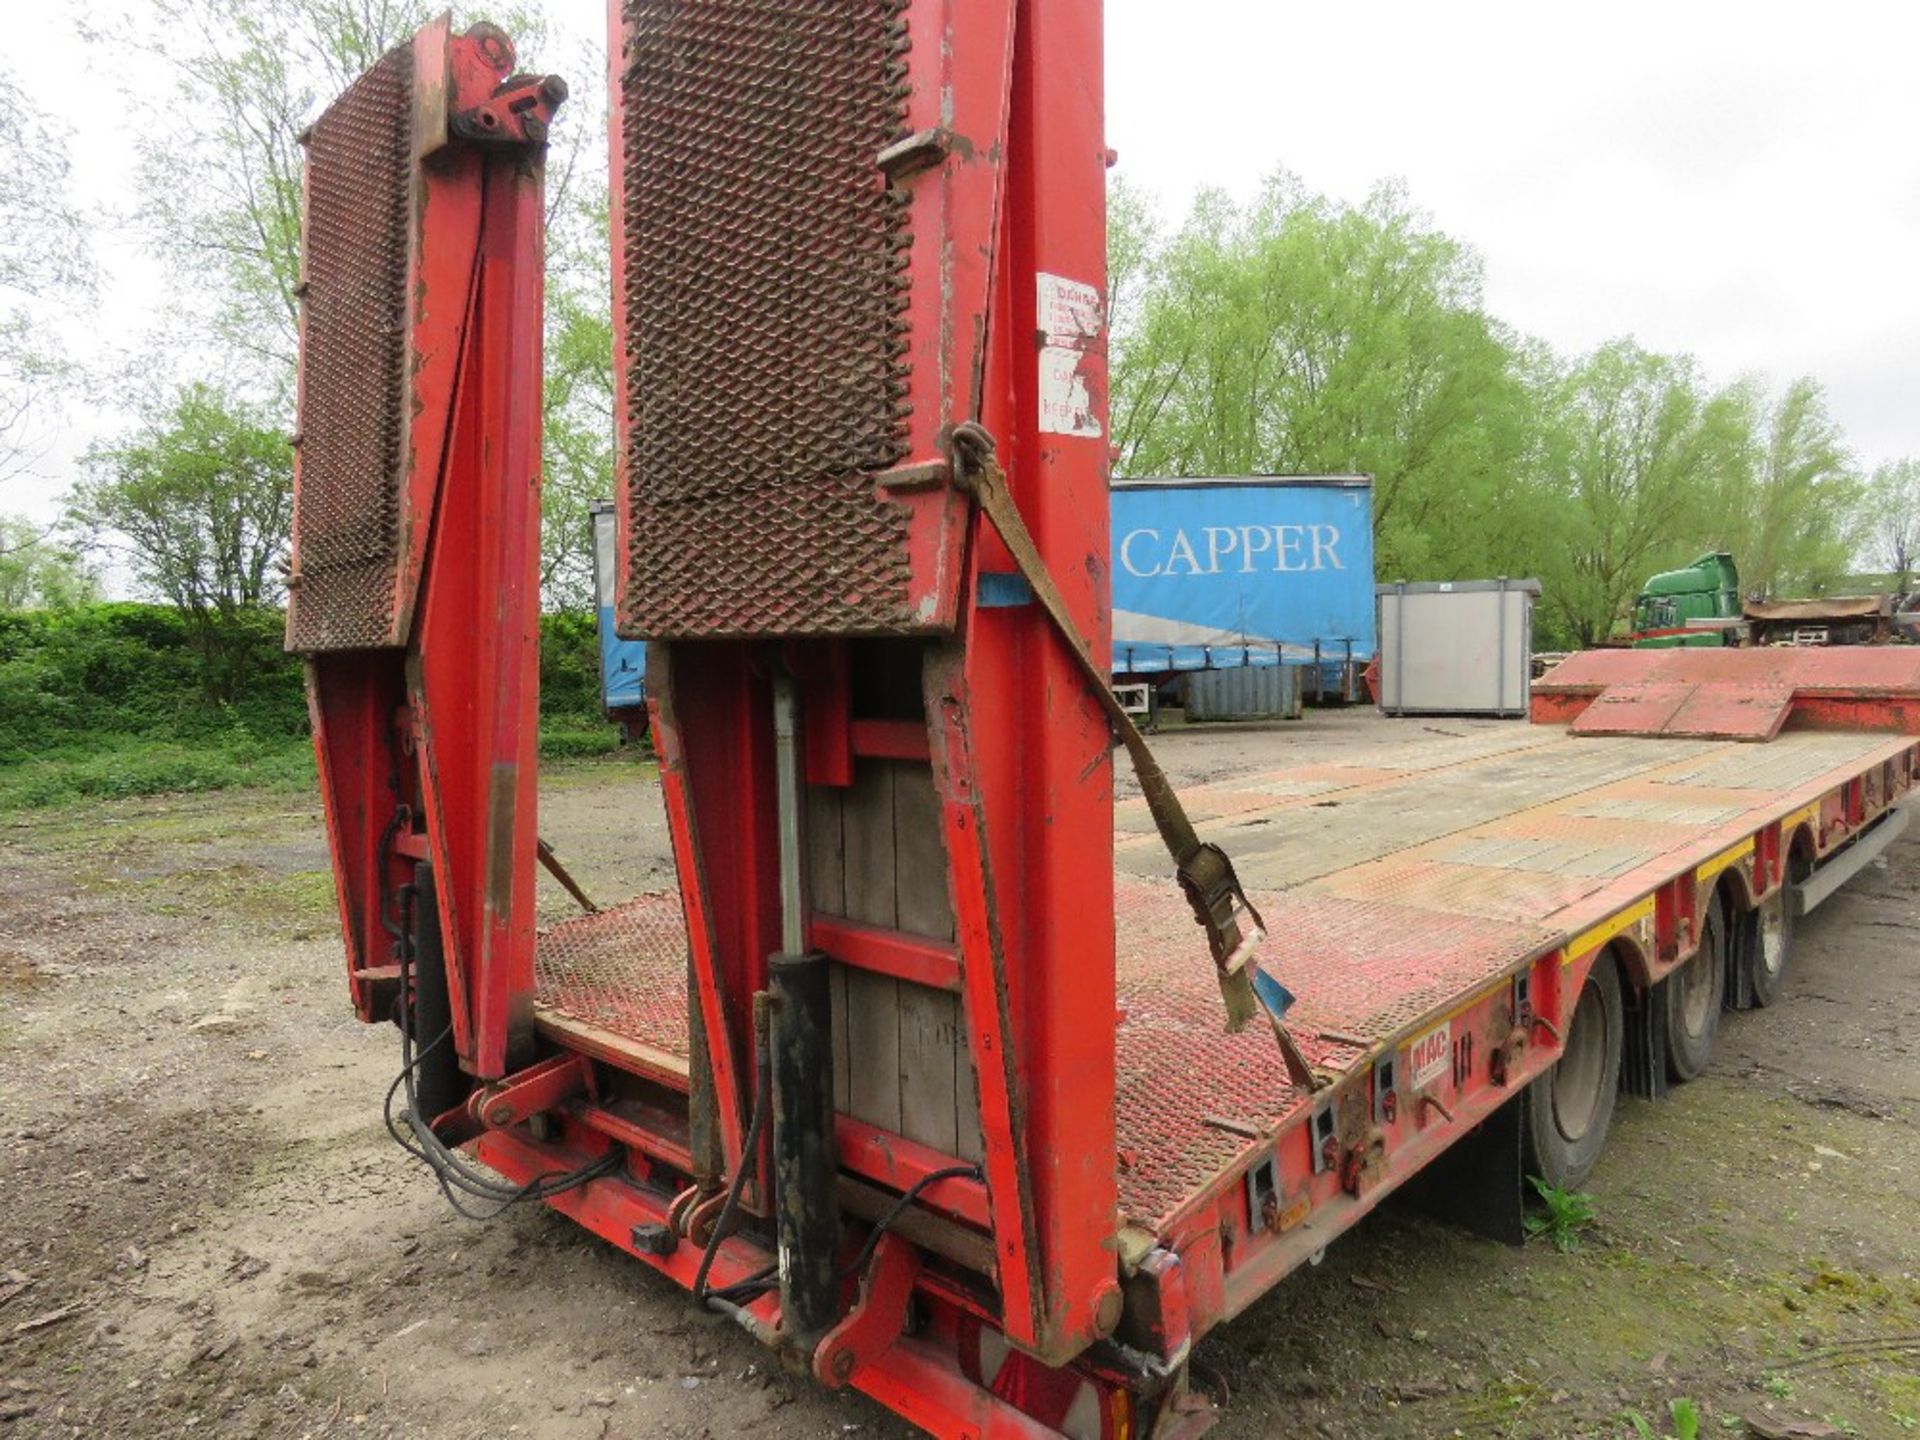 MAC S3-44 TRIAXLE LOW LOADER TRAILER WITH WINCH, YEAR 2015. TESTED UNTIL 30TH APRIL 2025. 13.6 OVERA - Image 12 of 15